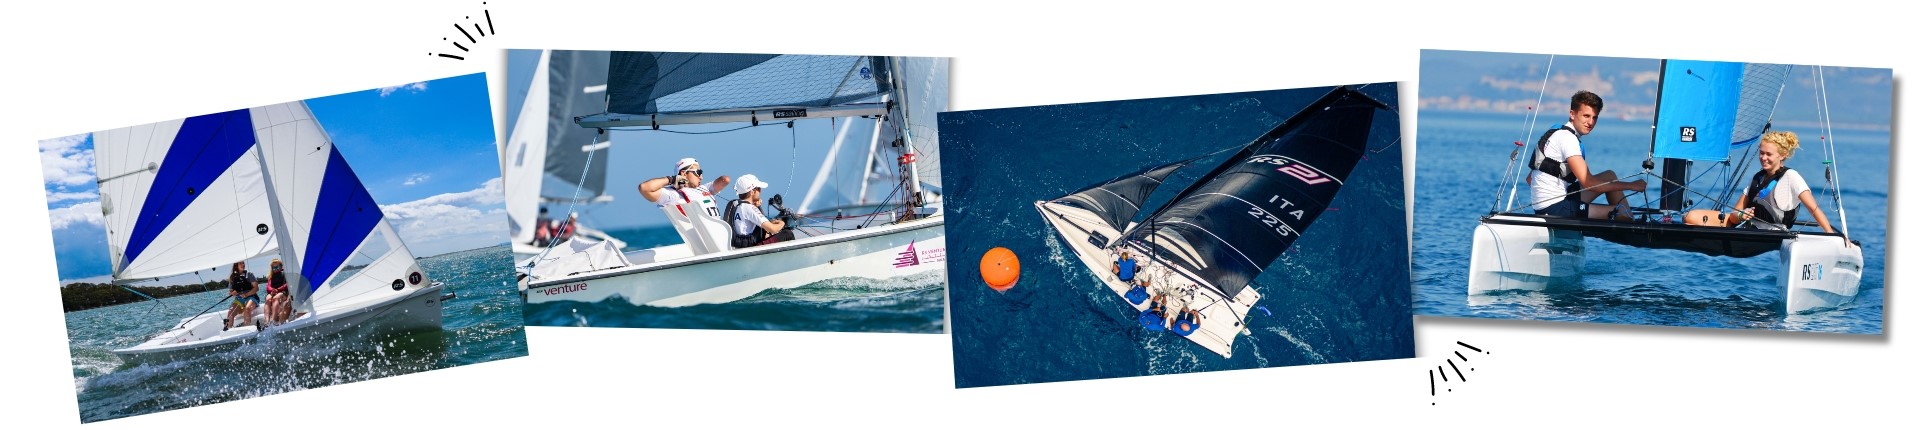 small sailboat manufacturers list